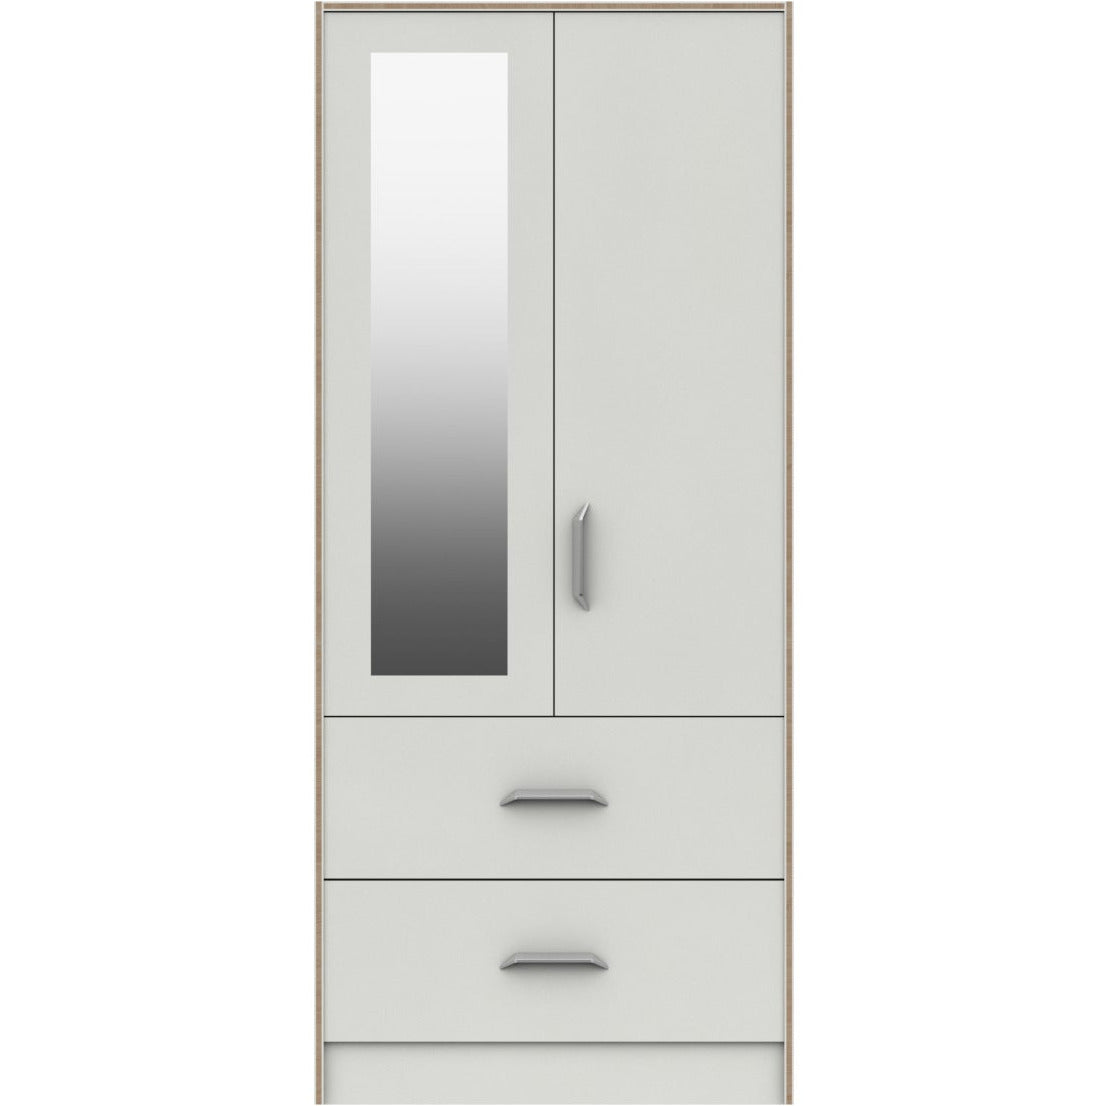 Marlow 2 Drawer Combi Wardrobe With Mirror